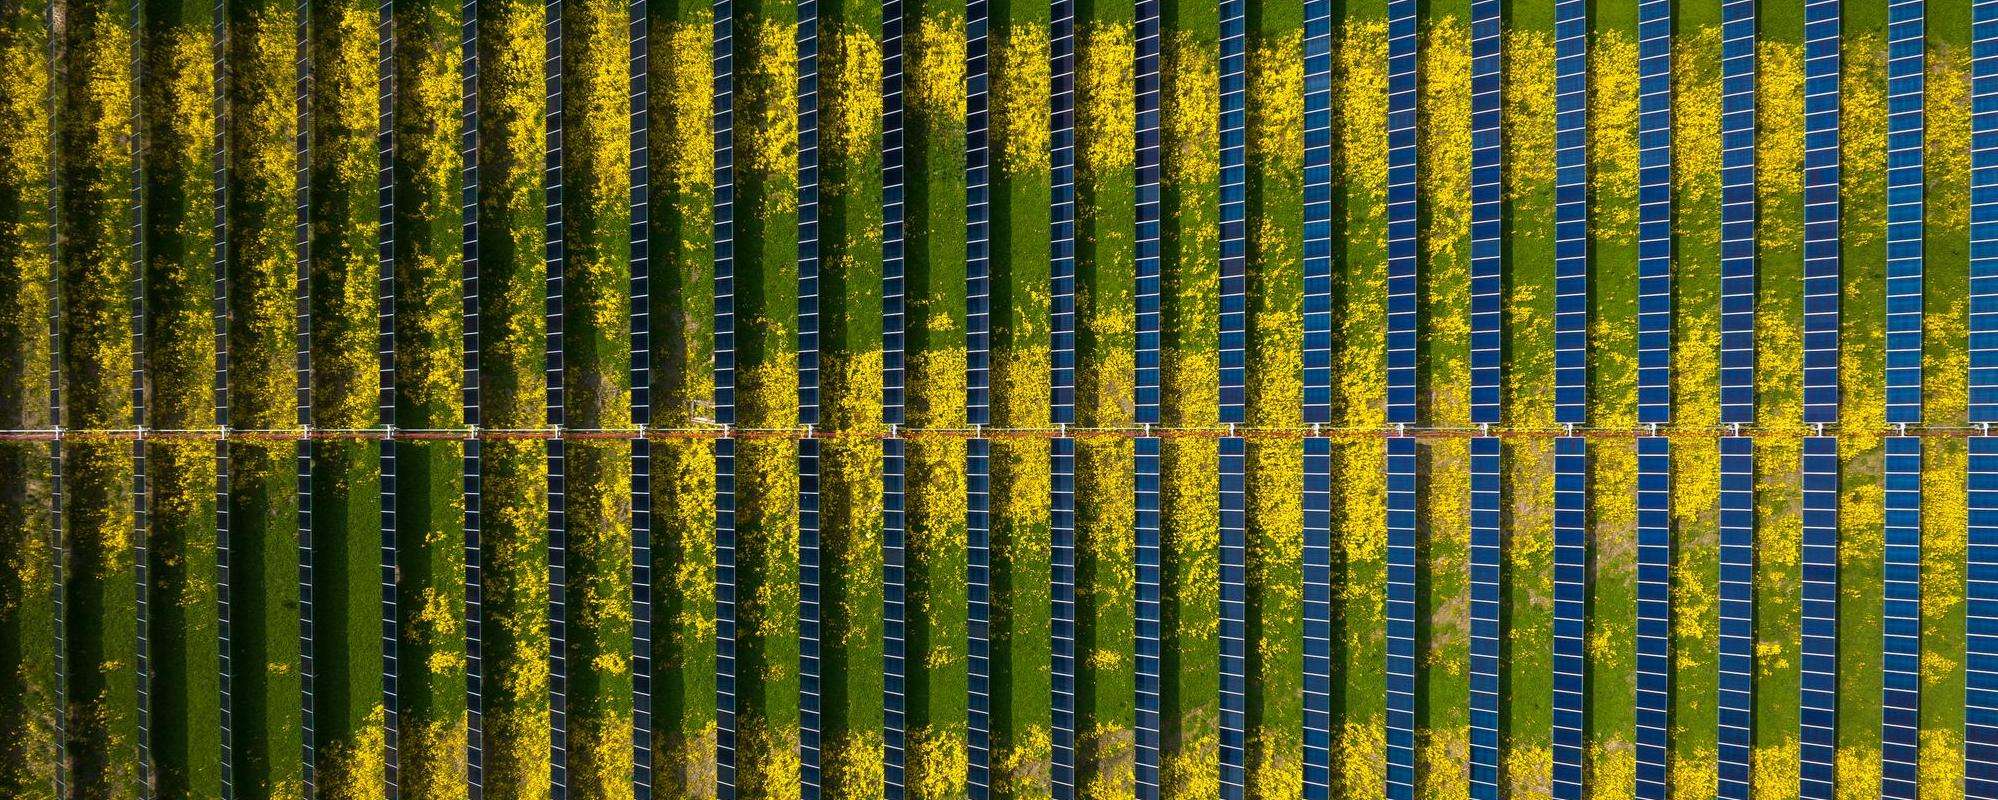 aerial shot looking down on a field of solar panels, with yellow flowers growing underneath